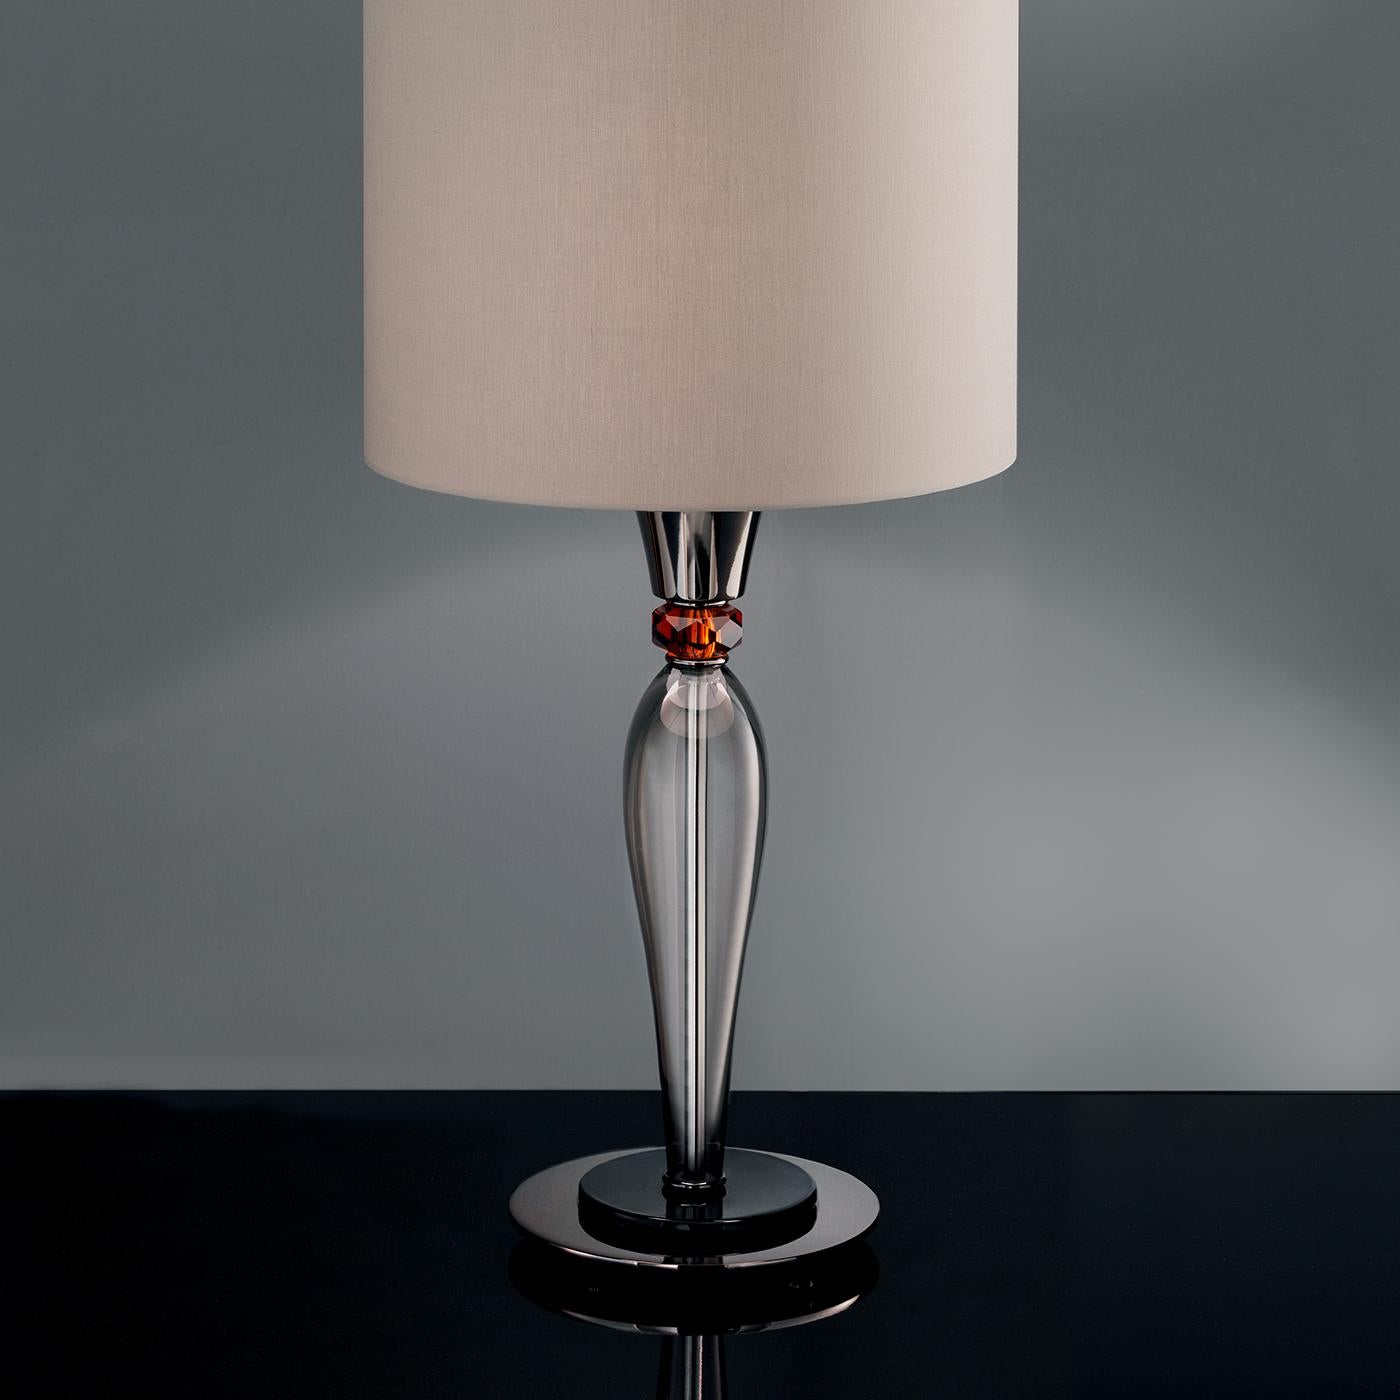 Available in many colors and finishes, this lamp features a cylindrical lampshade made of shiny chrome pvc on the inside and smokey transparent pvc on the outside. The small cup and the central part are made in Tuscany, while arms, crystal curls and